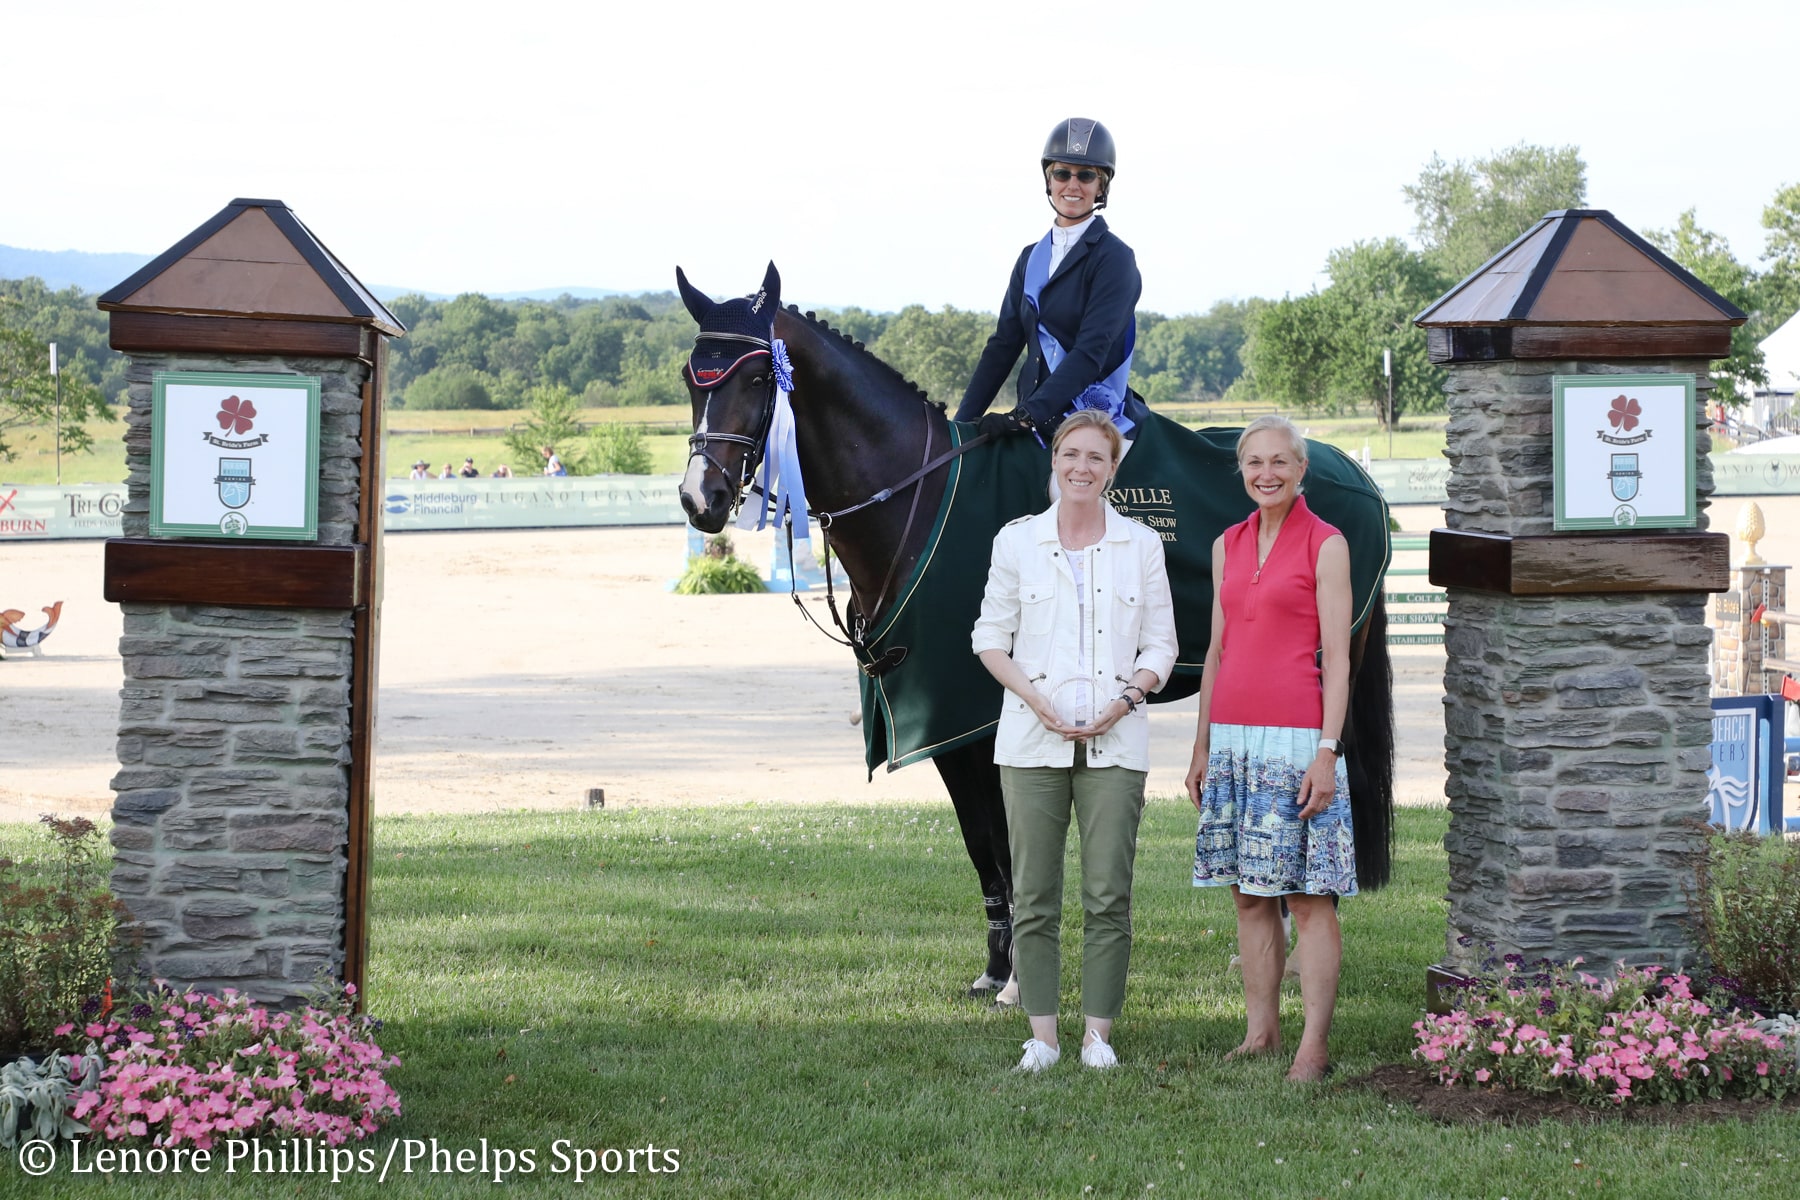 Schuyler Riley and Iceman de Muze with Kathy Russell of the Palm Beach Masters and Barbara Roux, President of Upperville Colt & Horse Show.